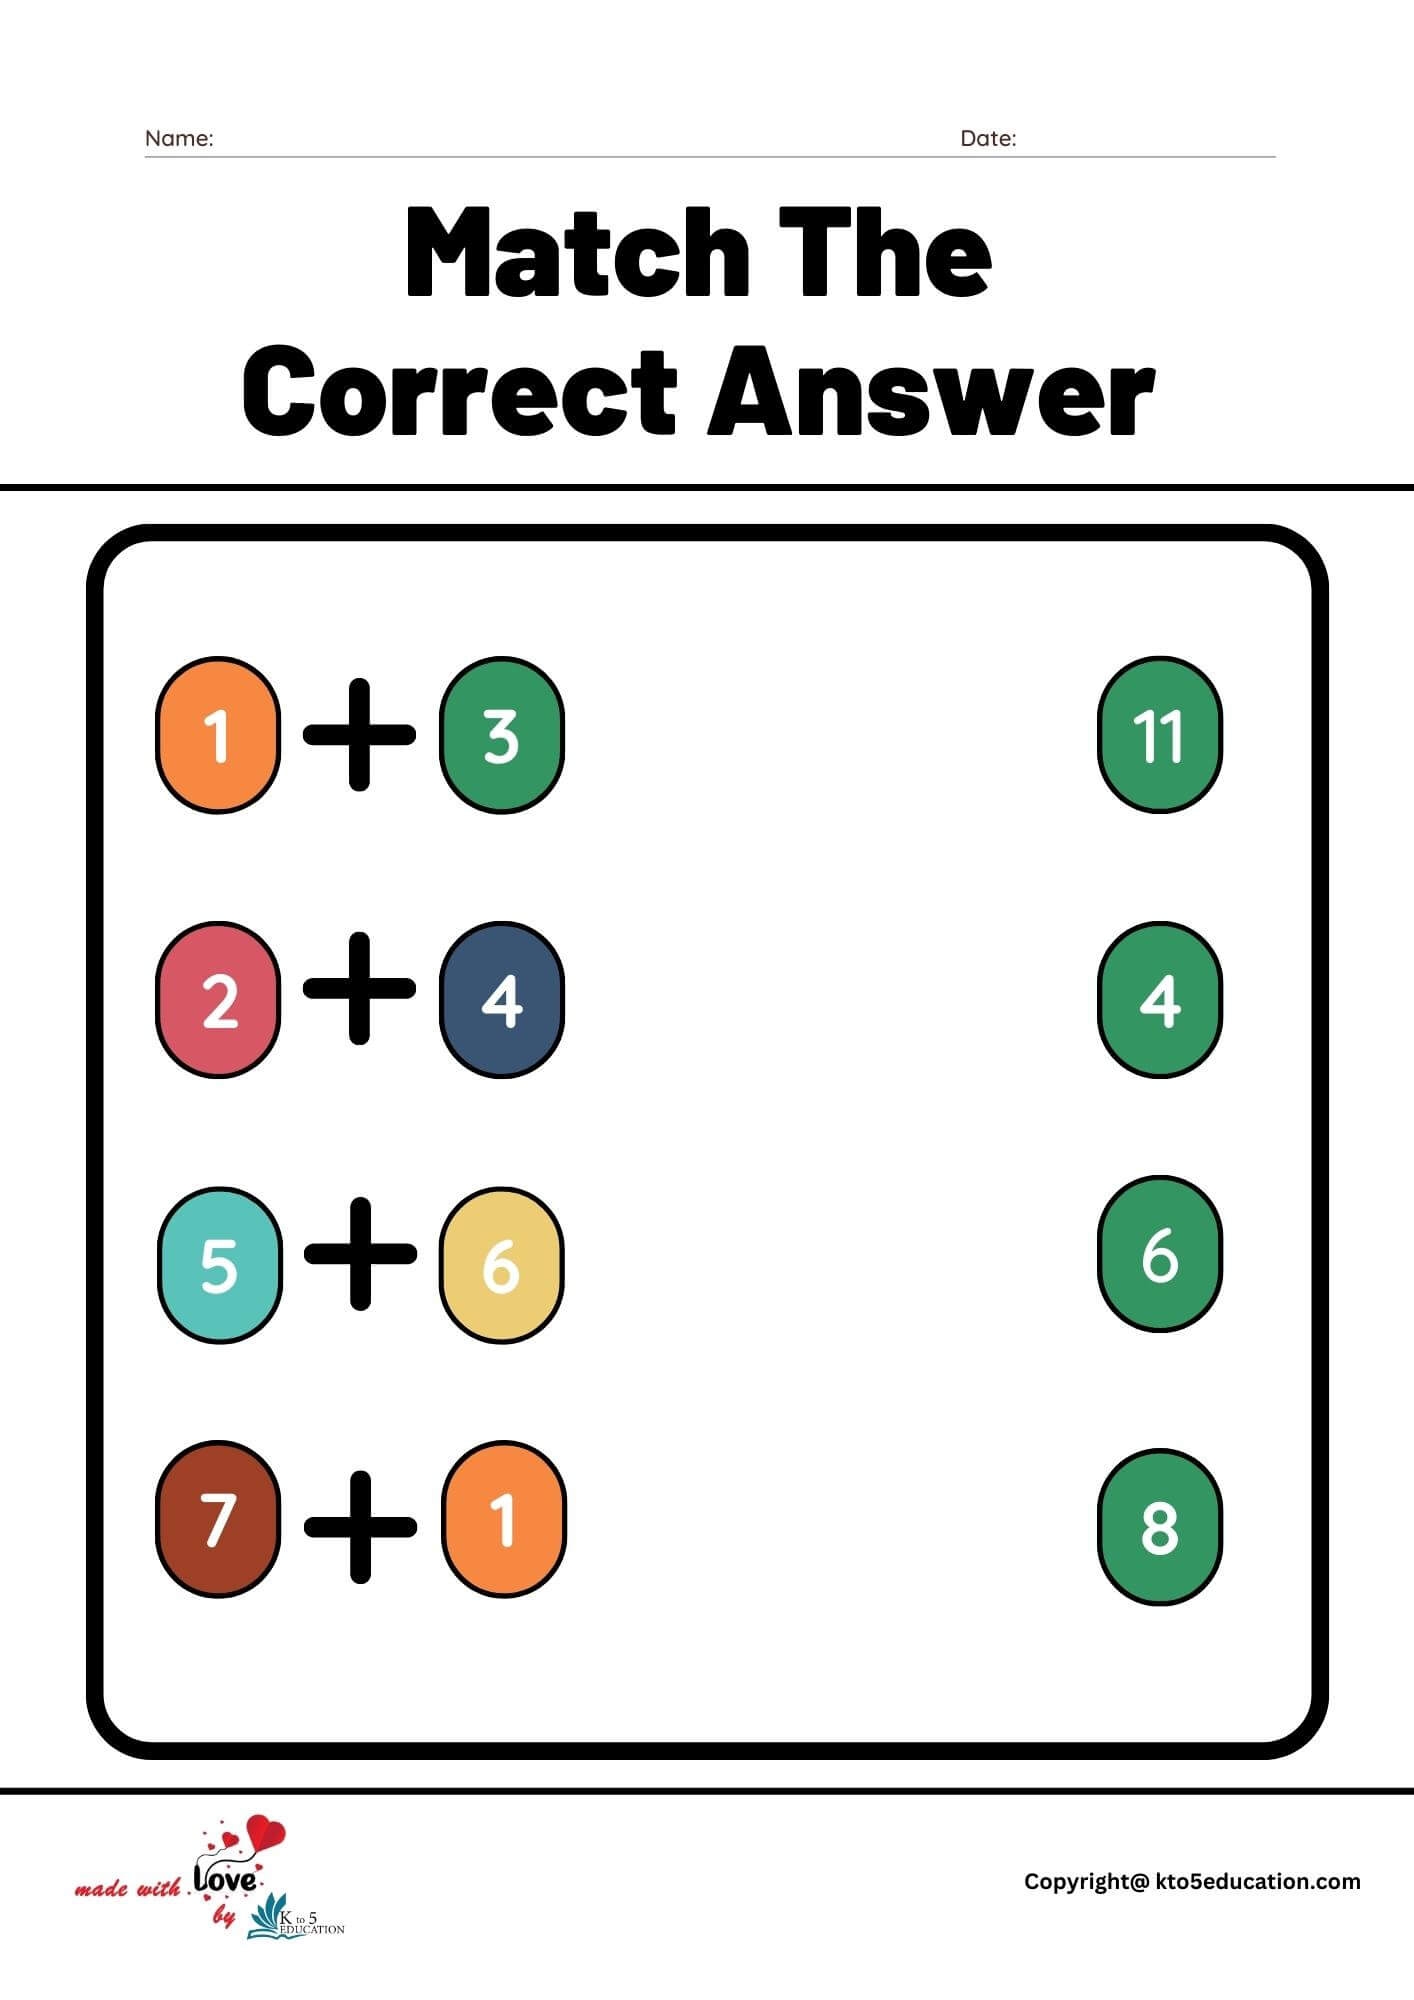 match-the-correct-answer-worksheet-free-download-math-worksheet-answers